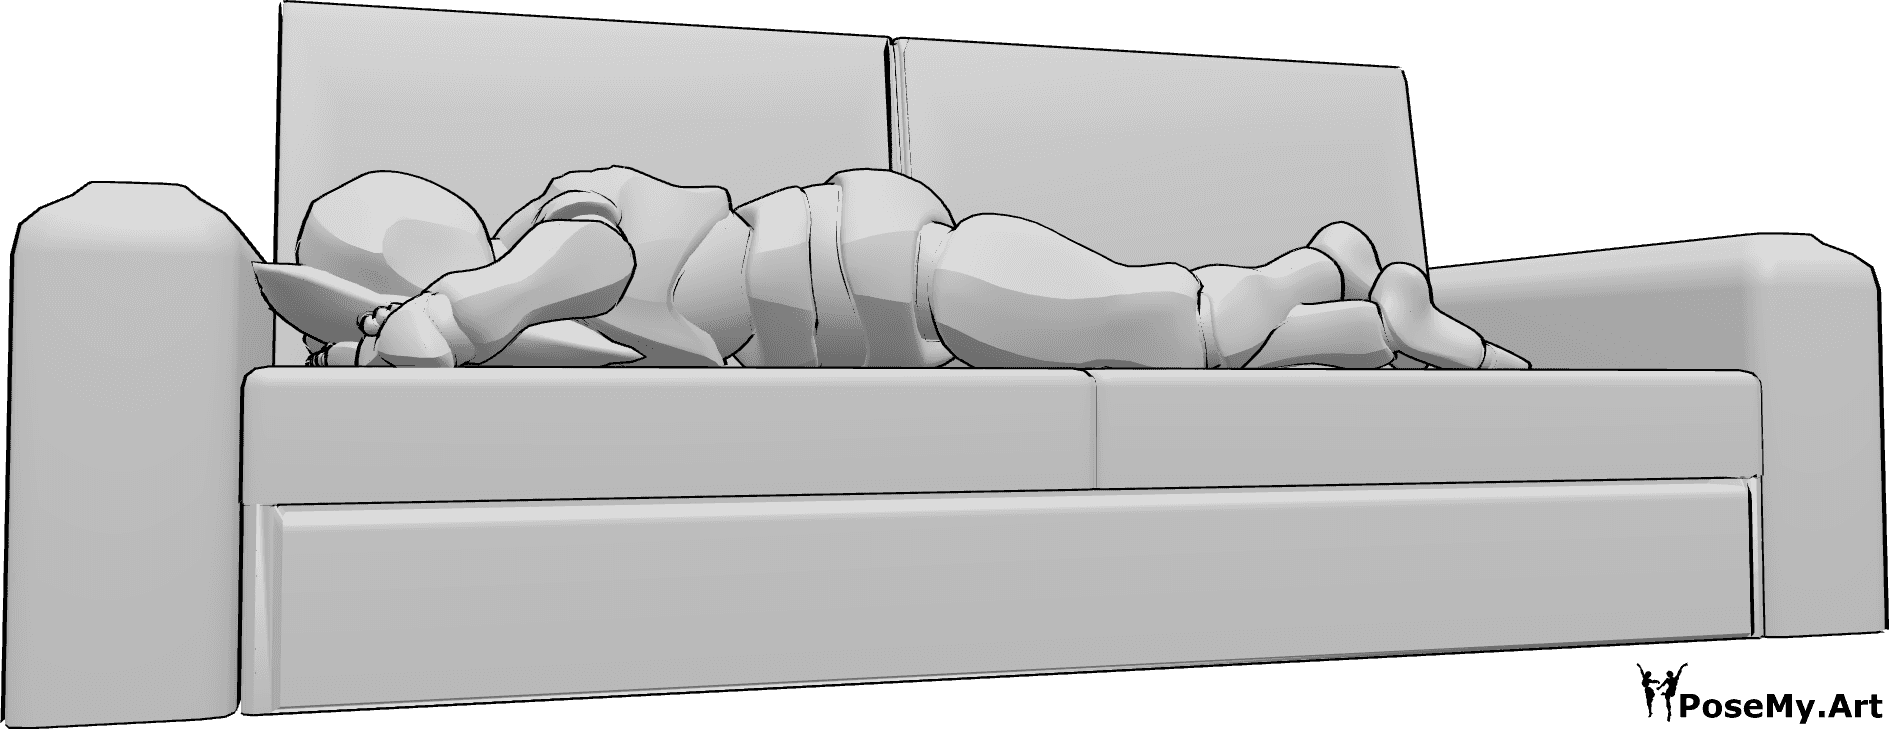 Pose Reference- Male lying couch pose - Male is lying on his stomach on the couch, resting his head on a pillow